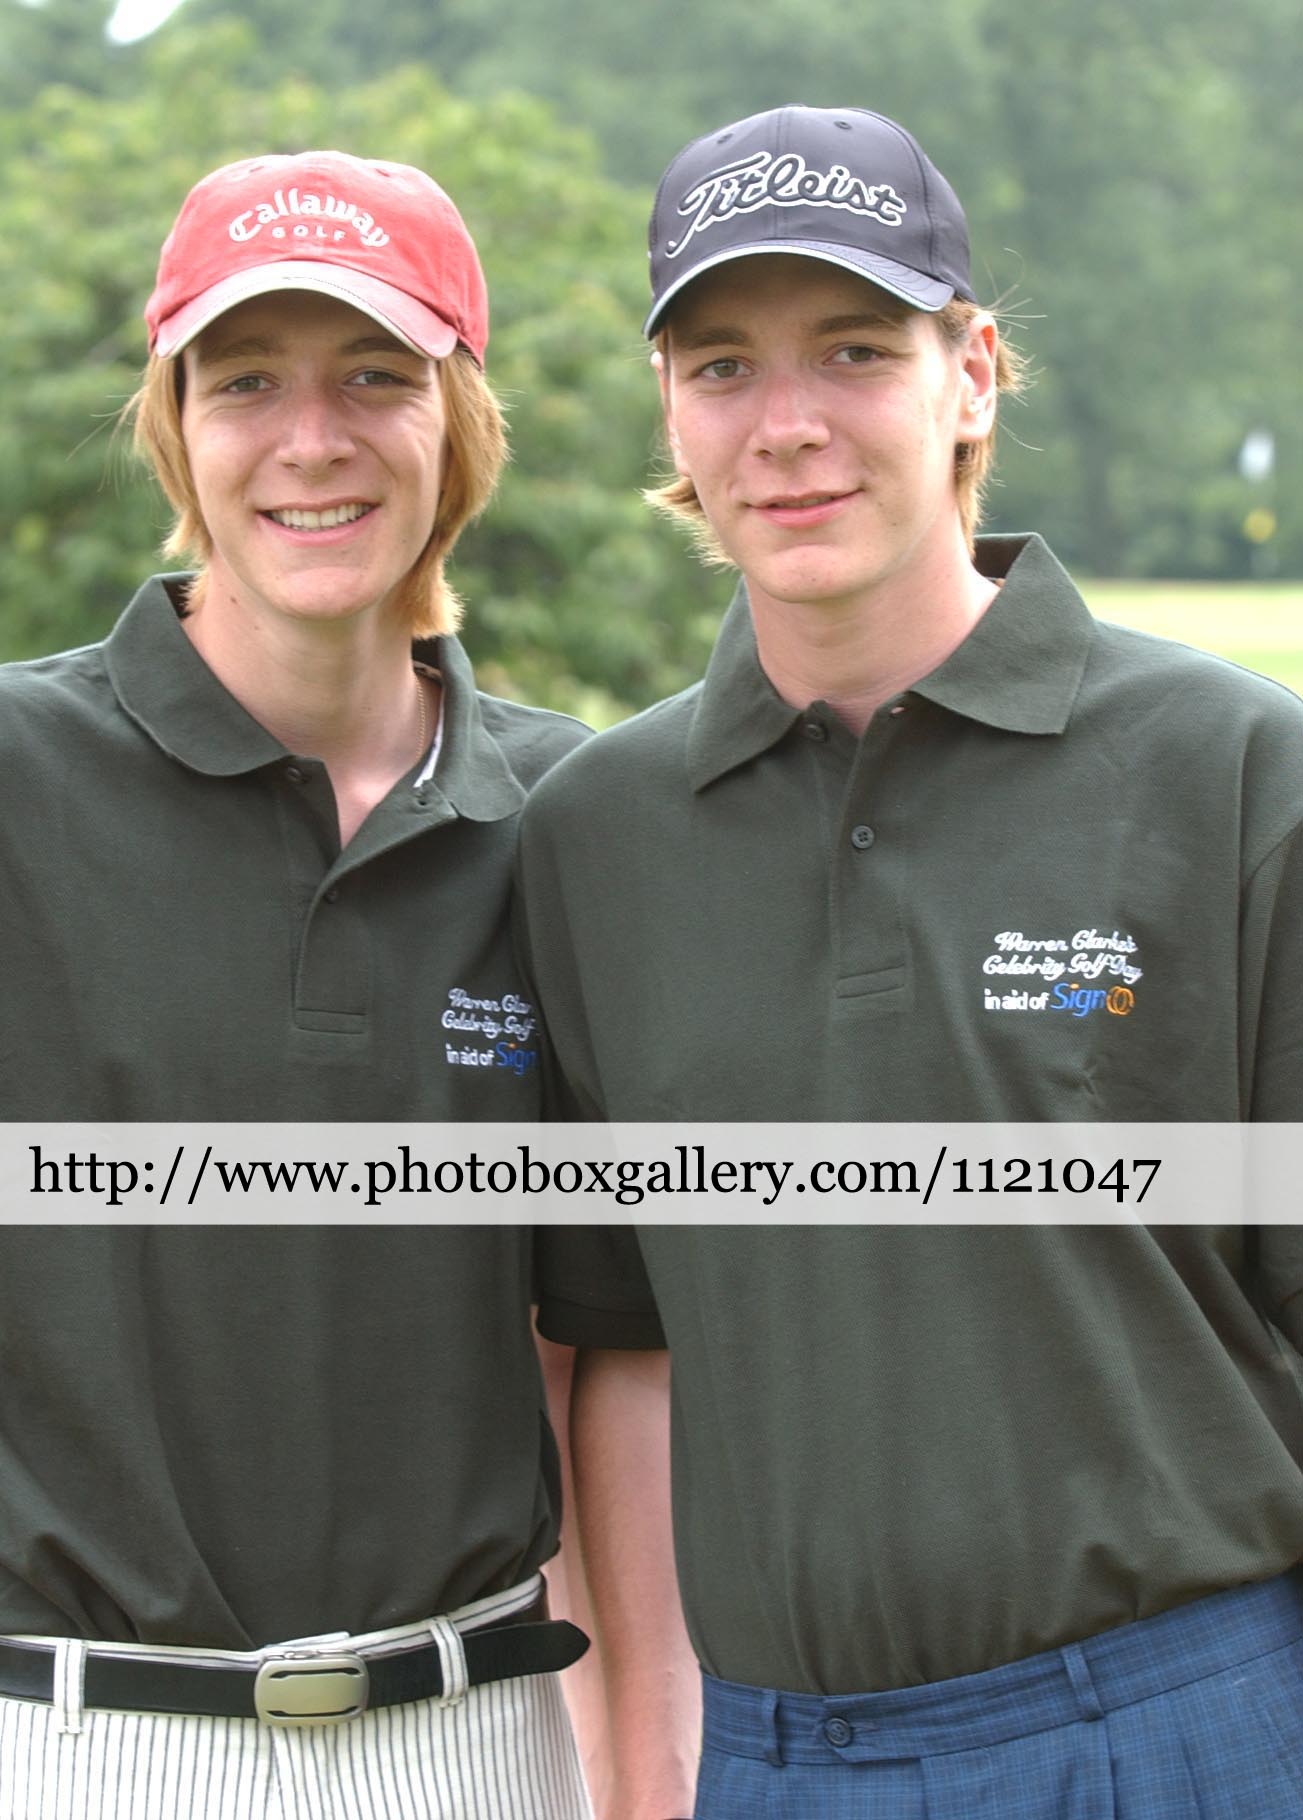 General photo of James and Oliver Phelps